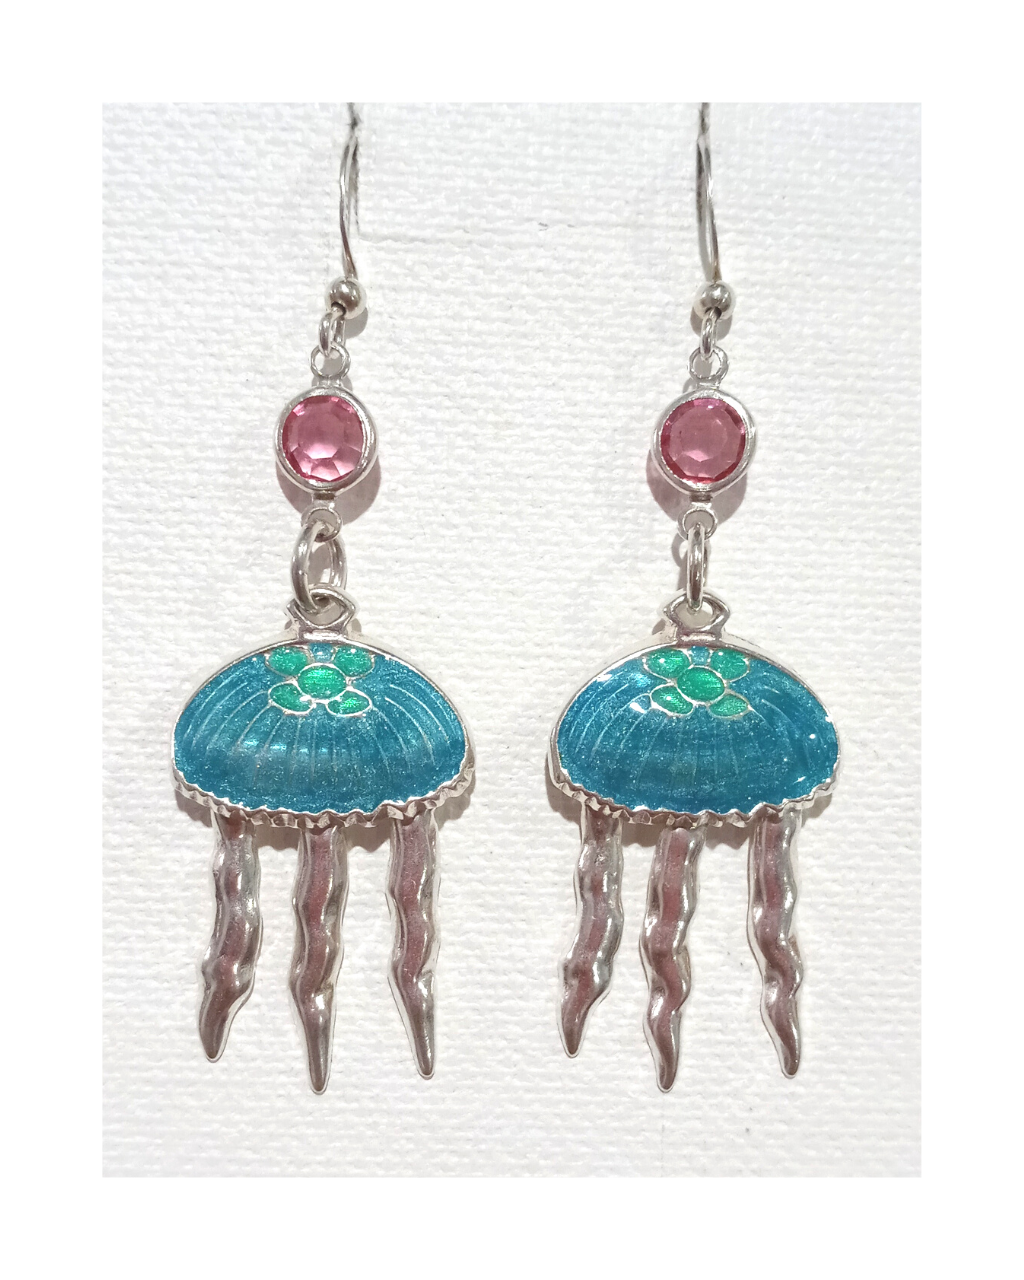 Sterling Hand-enameled Moveable Dangly Legs jellyfish with Pink Swarovski Crystal Earrings 2 1/2"H X 3/4"W.